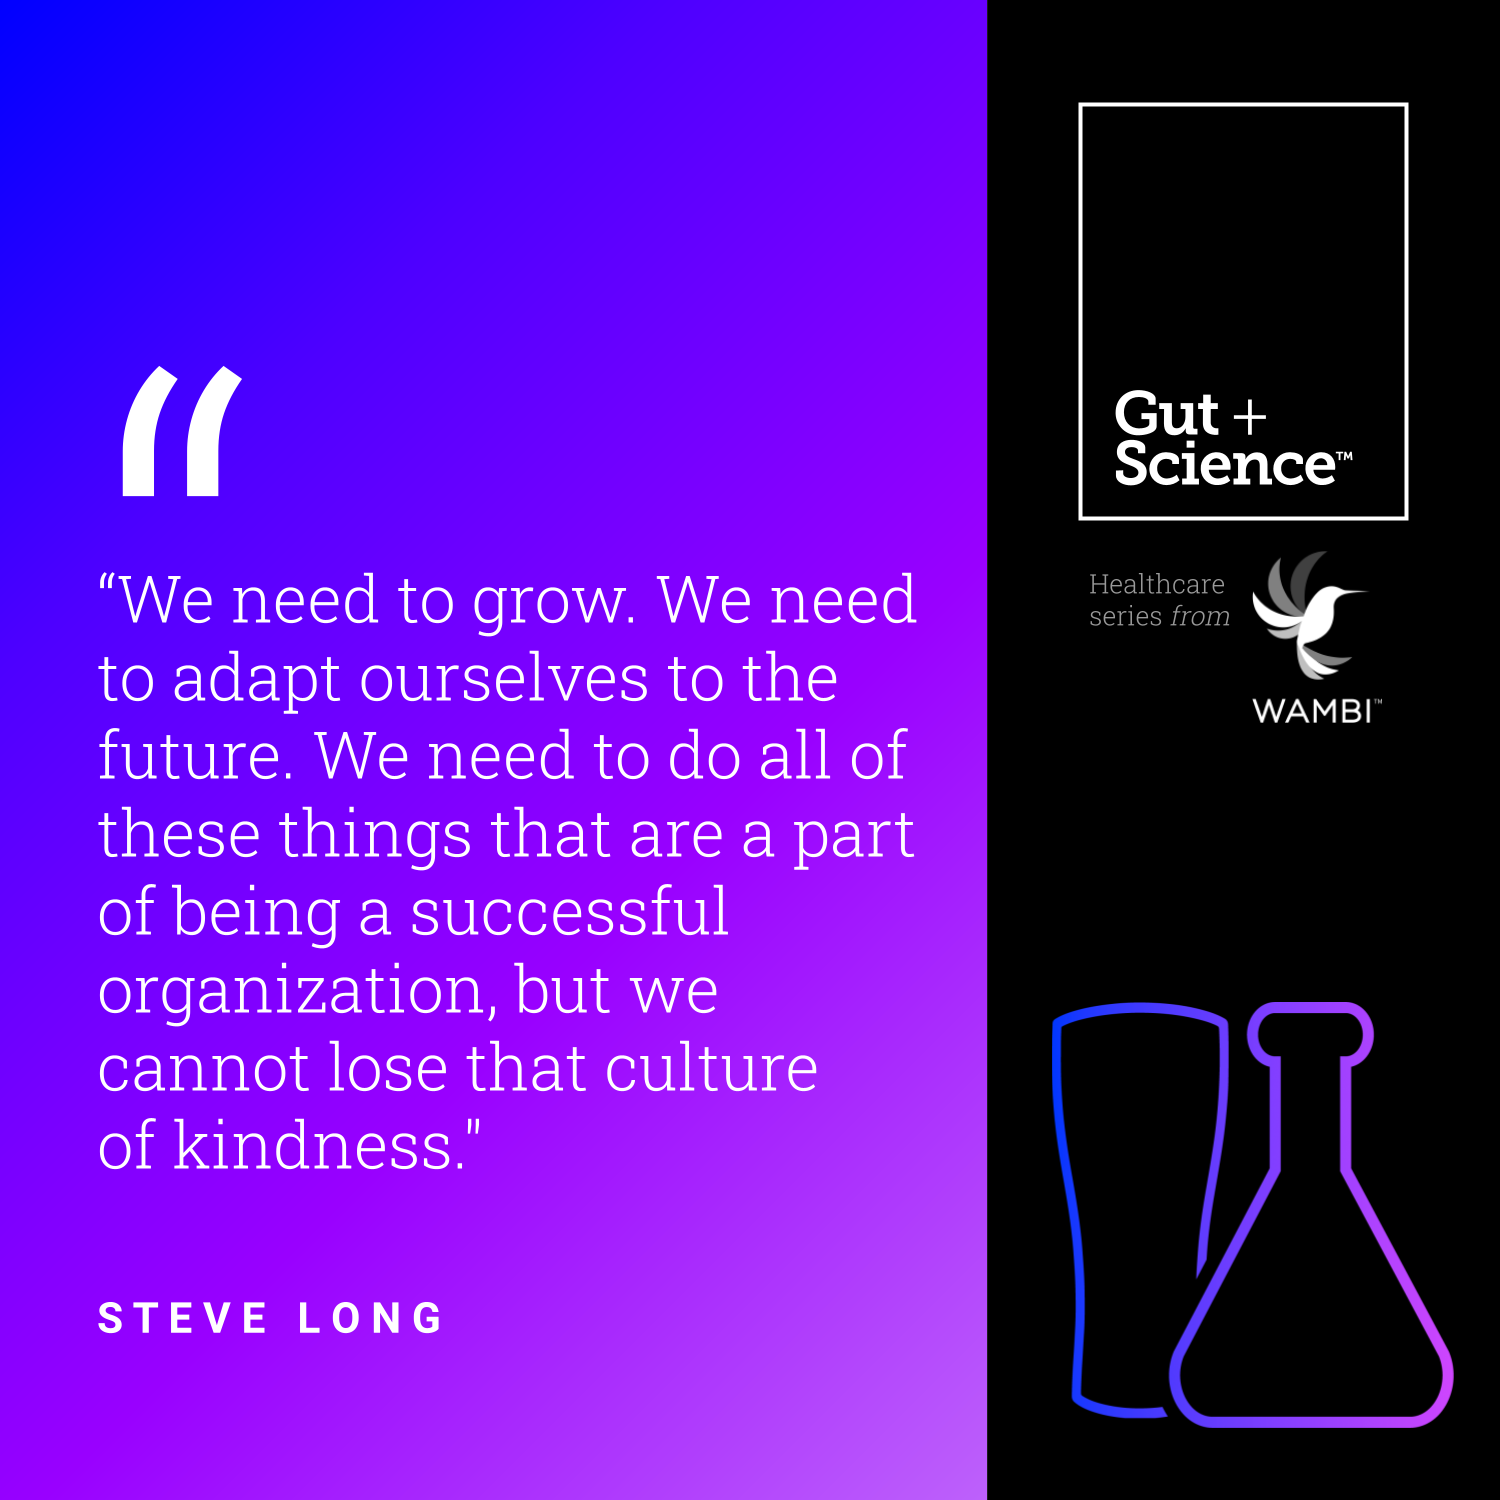 Steve Long Gut + Science Podcast with Wambi